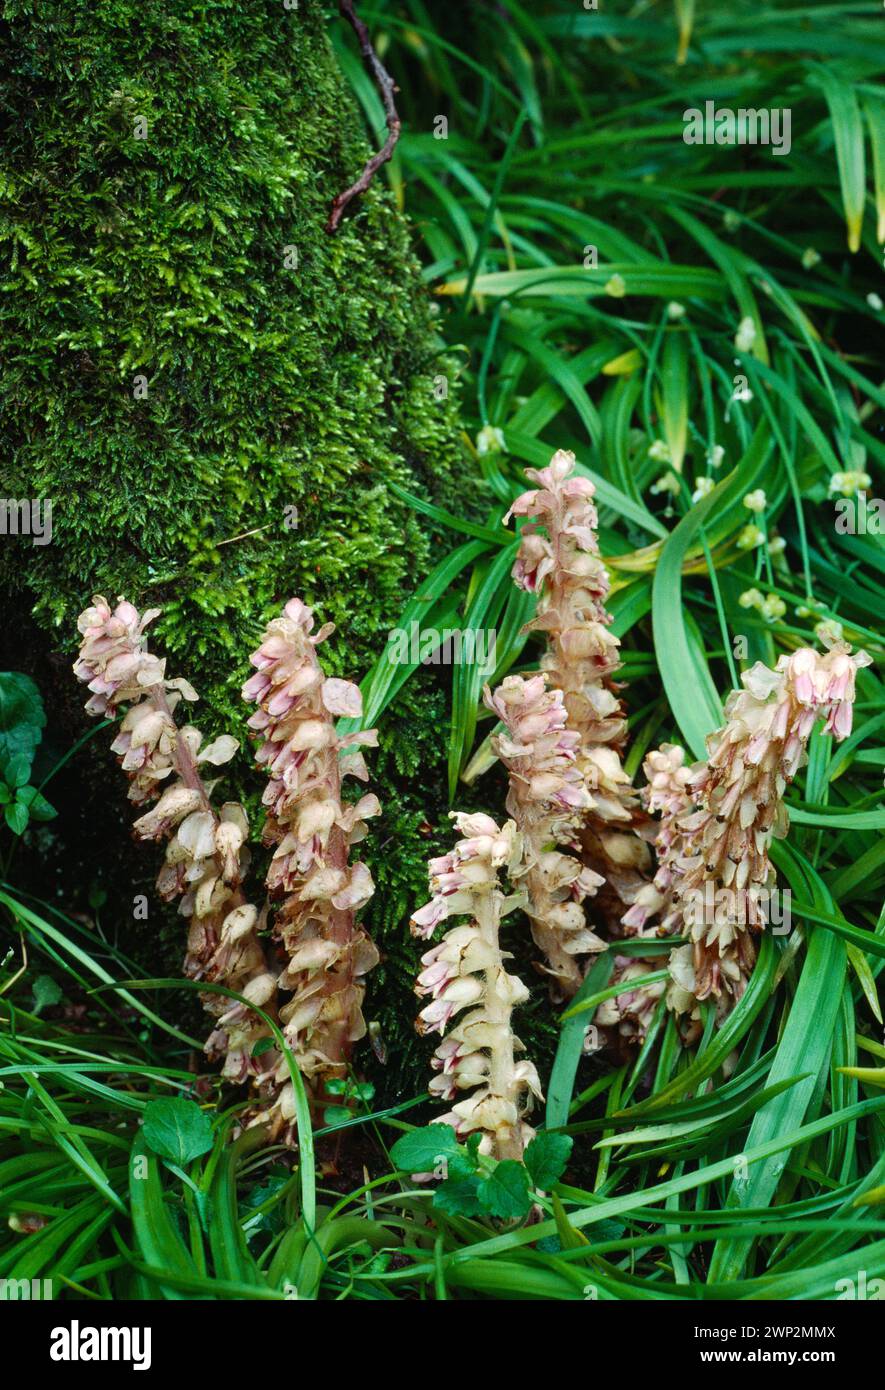 Toothwort (Lathraea squamaria) in flower and growing at the base of an wych elm (Ulmus glabra) tree in deciduous woodland, Berwickshire, Scotland. Stock Photo